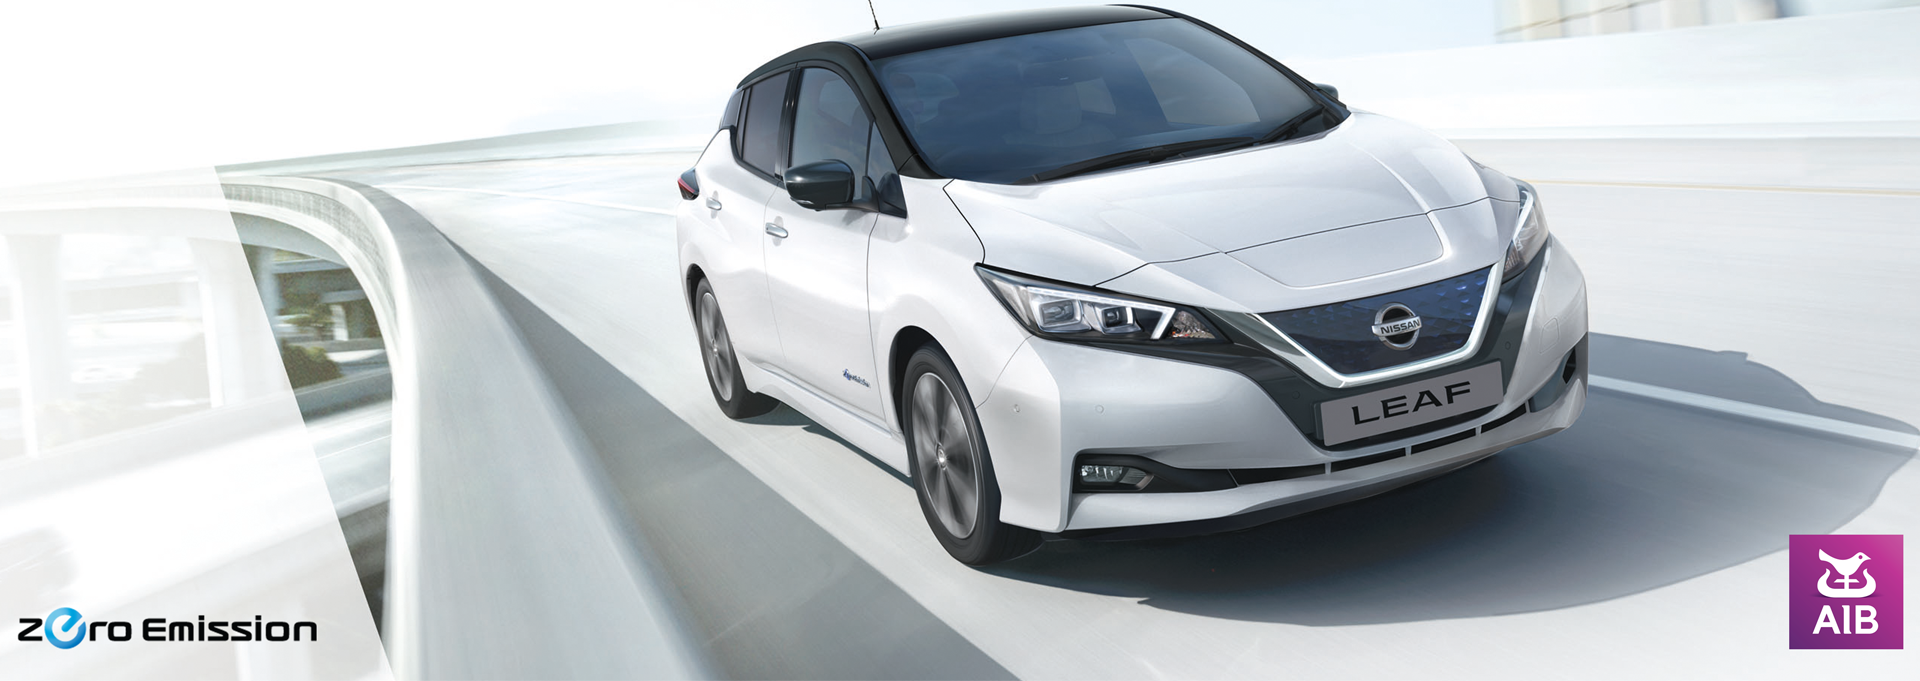 Contact us about the Nissan LEAF